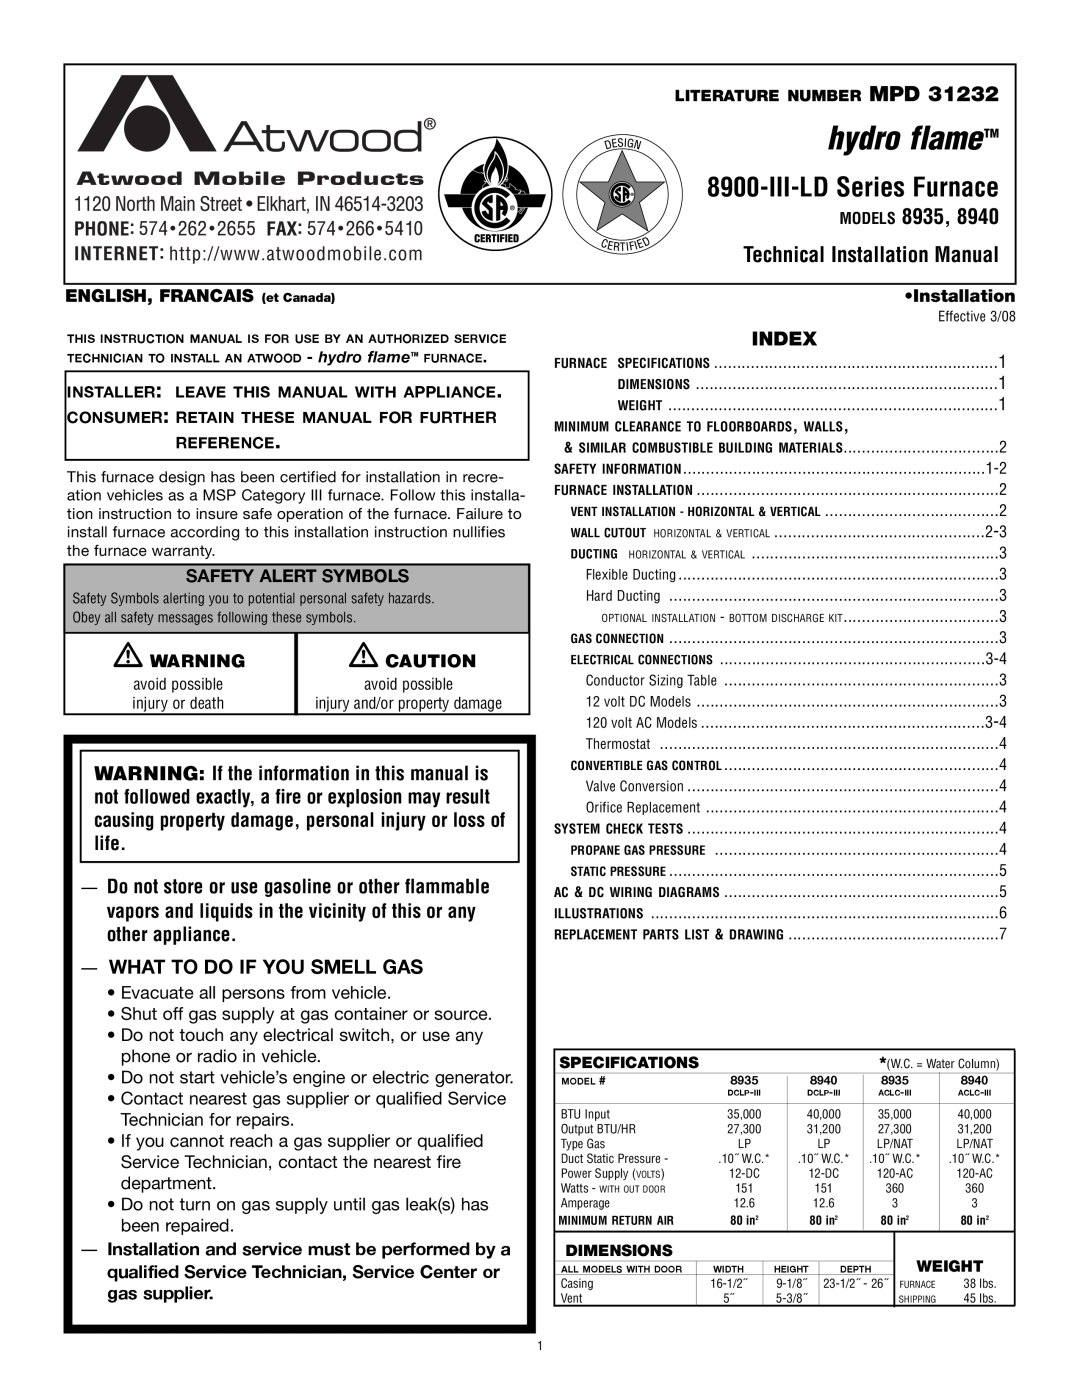 Atwood Mobile Products 8935 installation manual What To Do If You Smell Gas, Index, hydro flameTM, III-LDSeries Furnace 